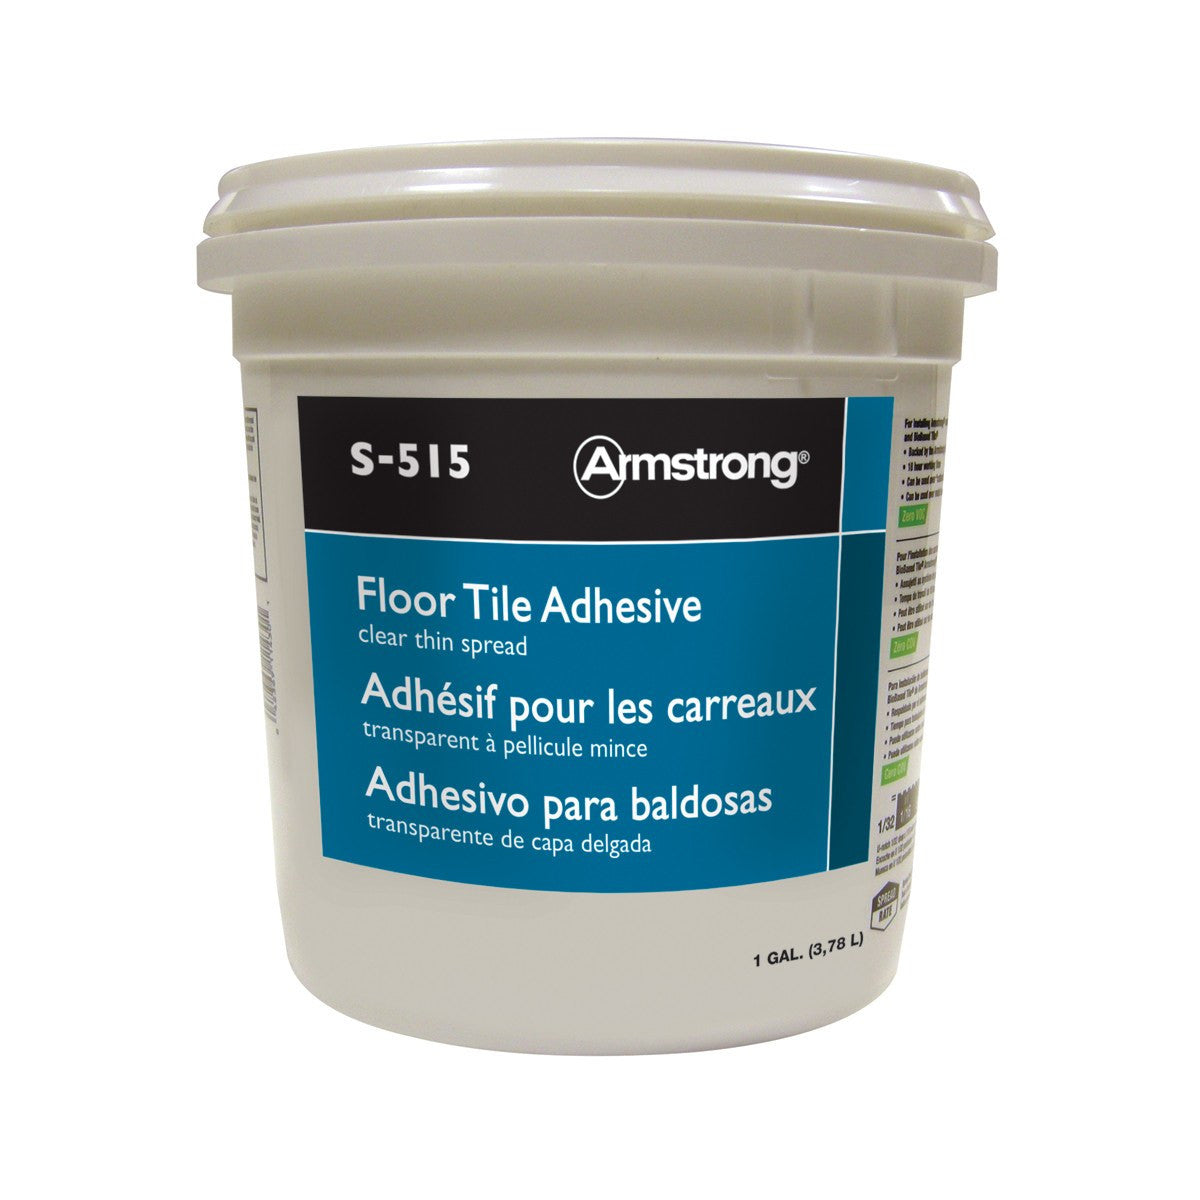 Armstrong S-515 VCT Tile Strong Adhesive 1 Gallon Clear Thin Spread -  Covers 300 sq ft per 1 Gallon